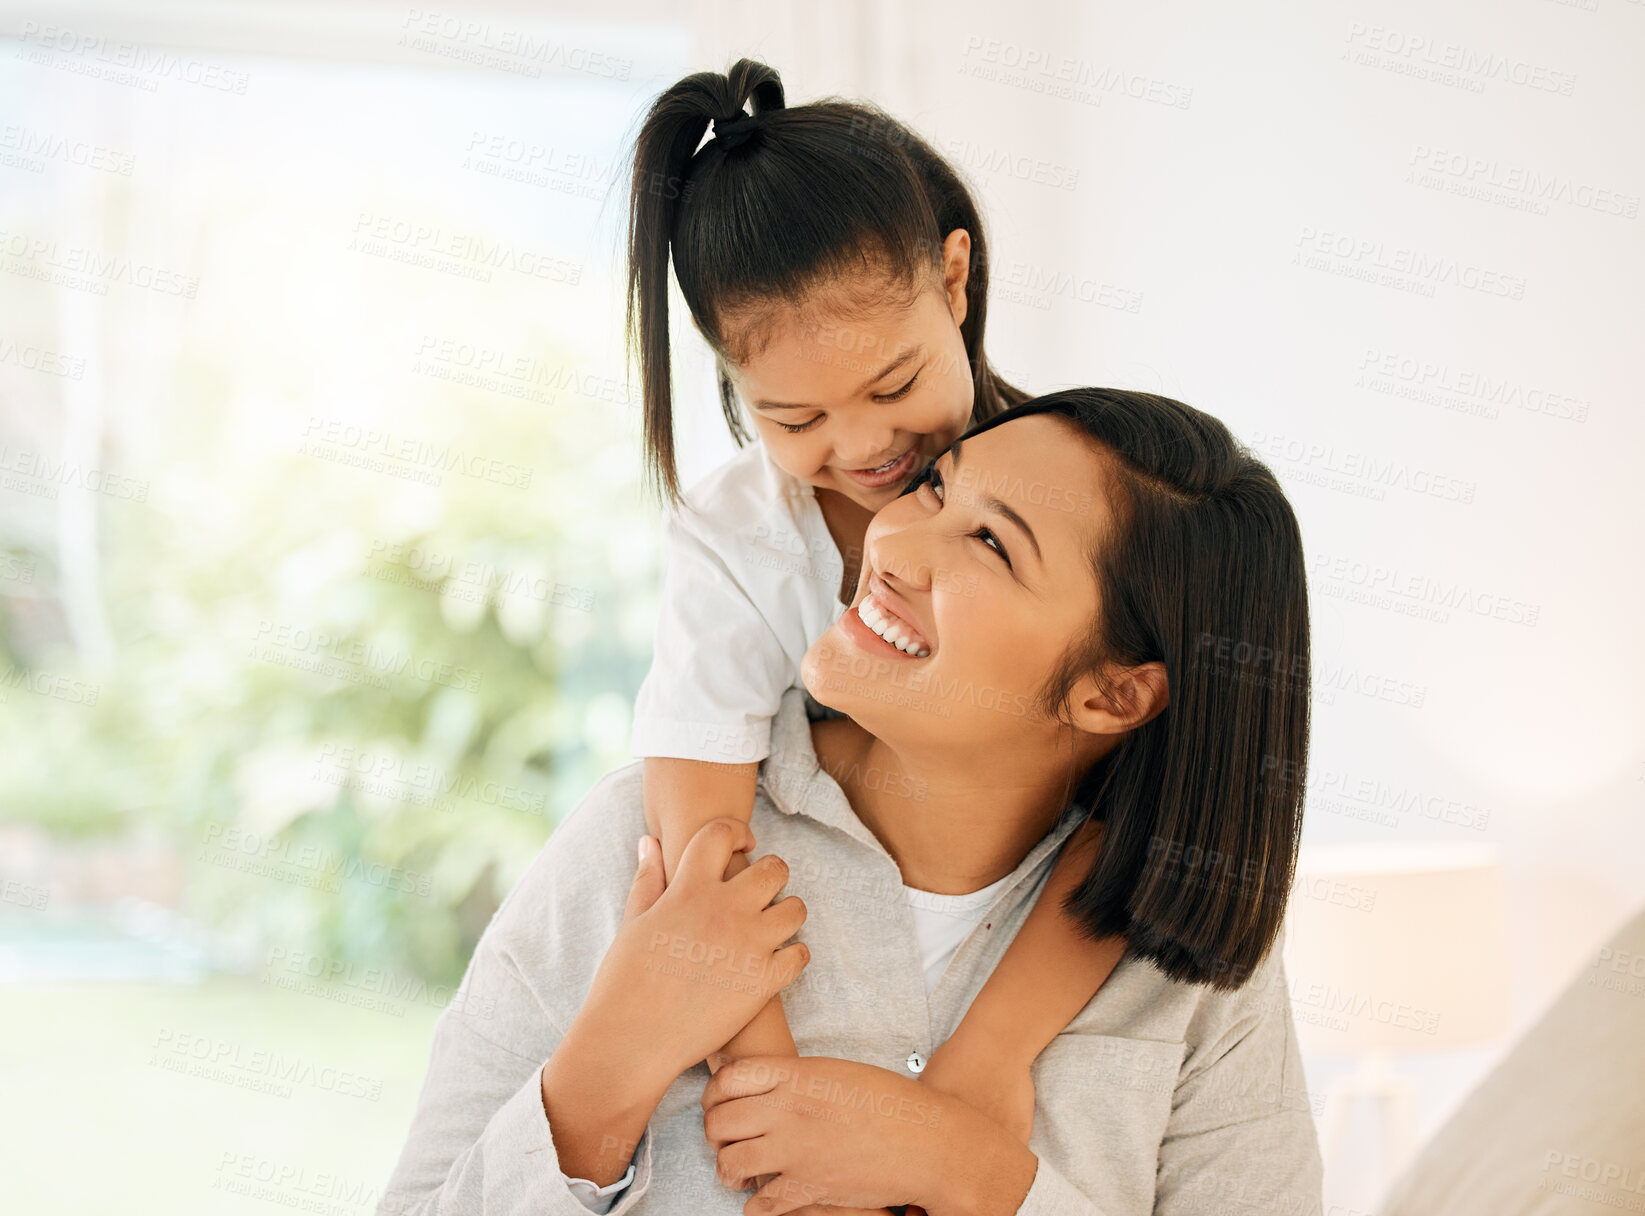 Buy stock photo Shot of a young mother and daughter bonding together at home